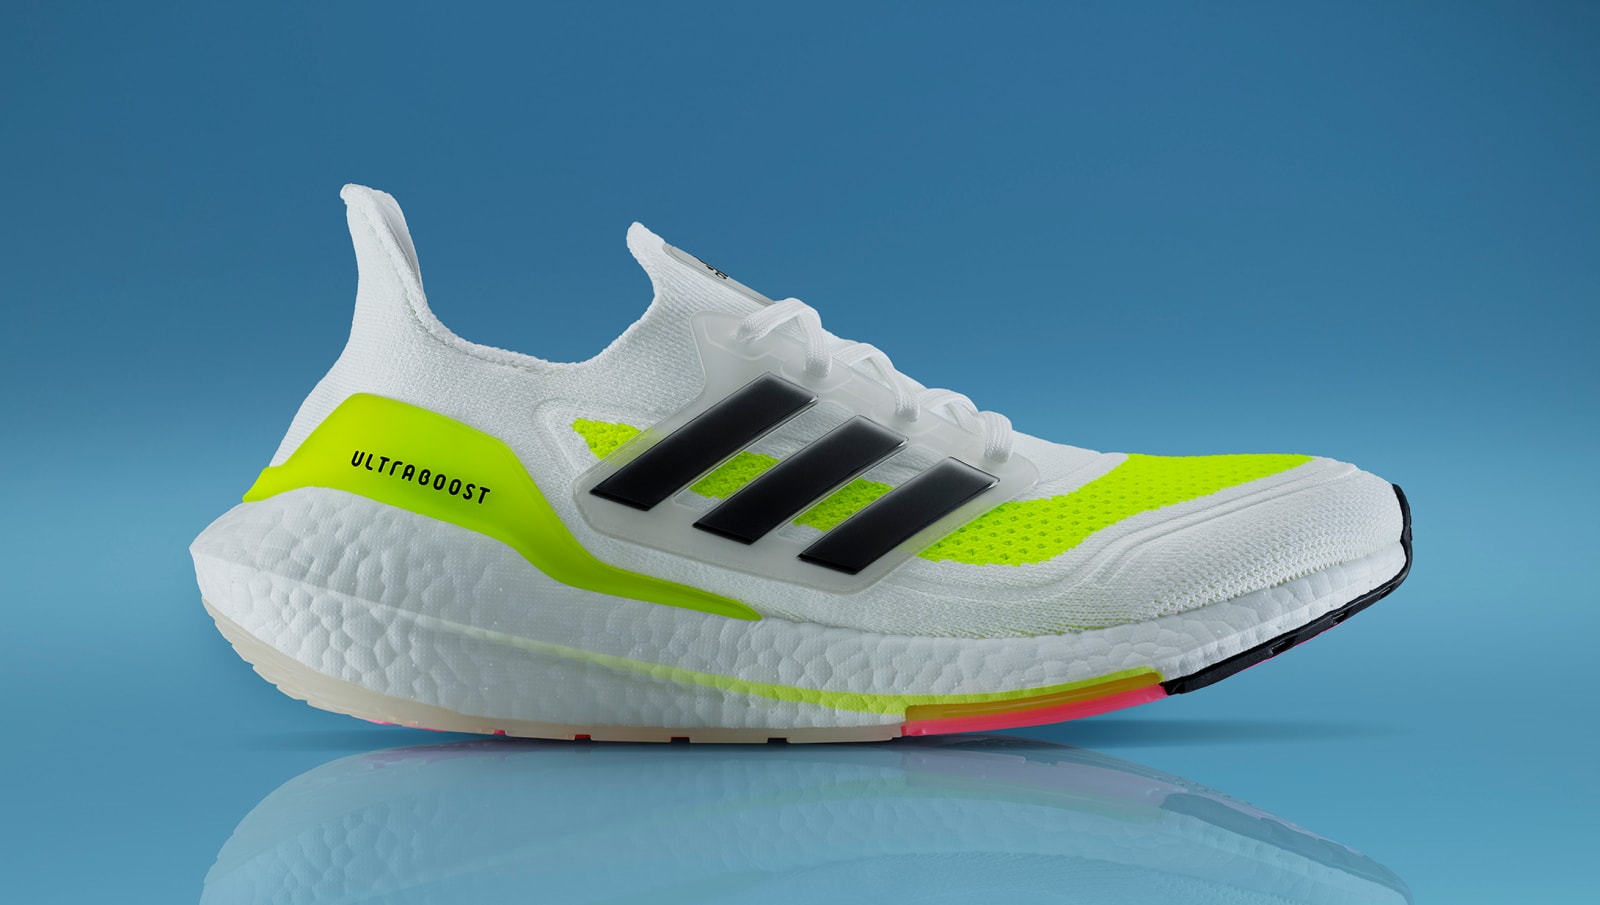 Adidas UltraBoost 21 Unveiled: New Photos – The Shade Tree